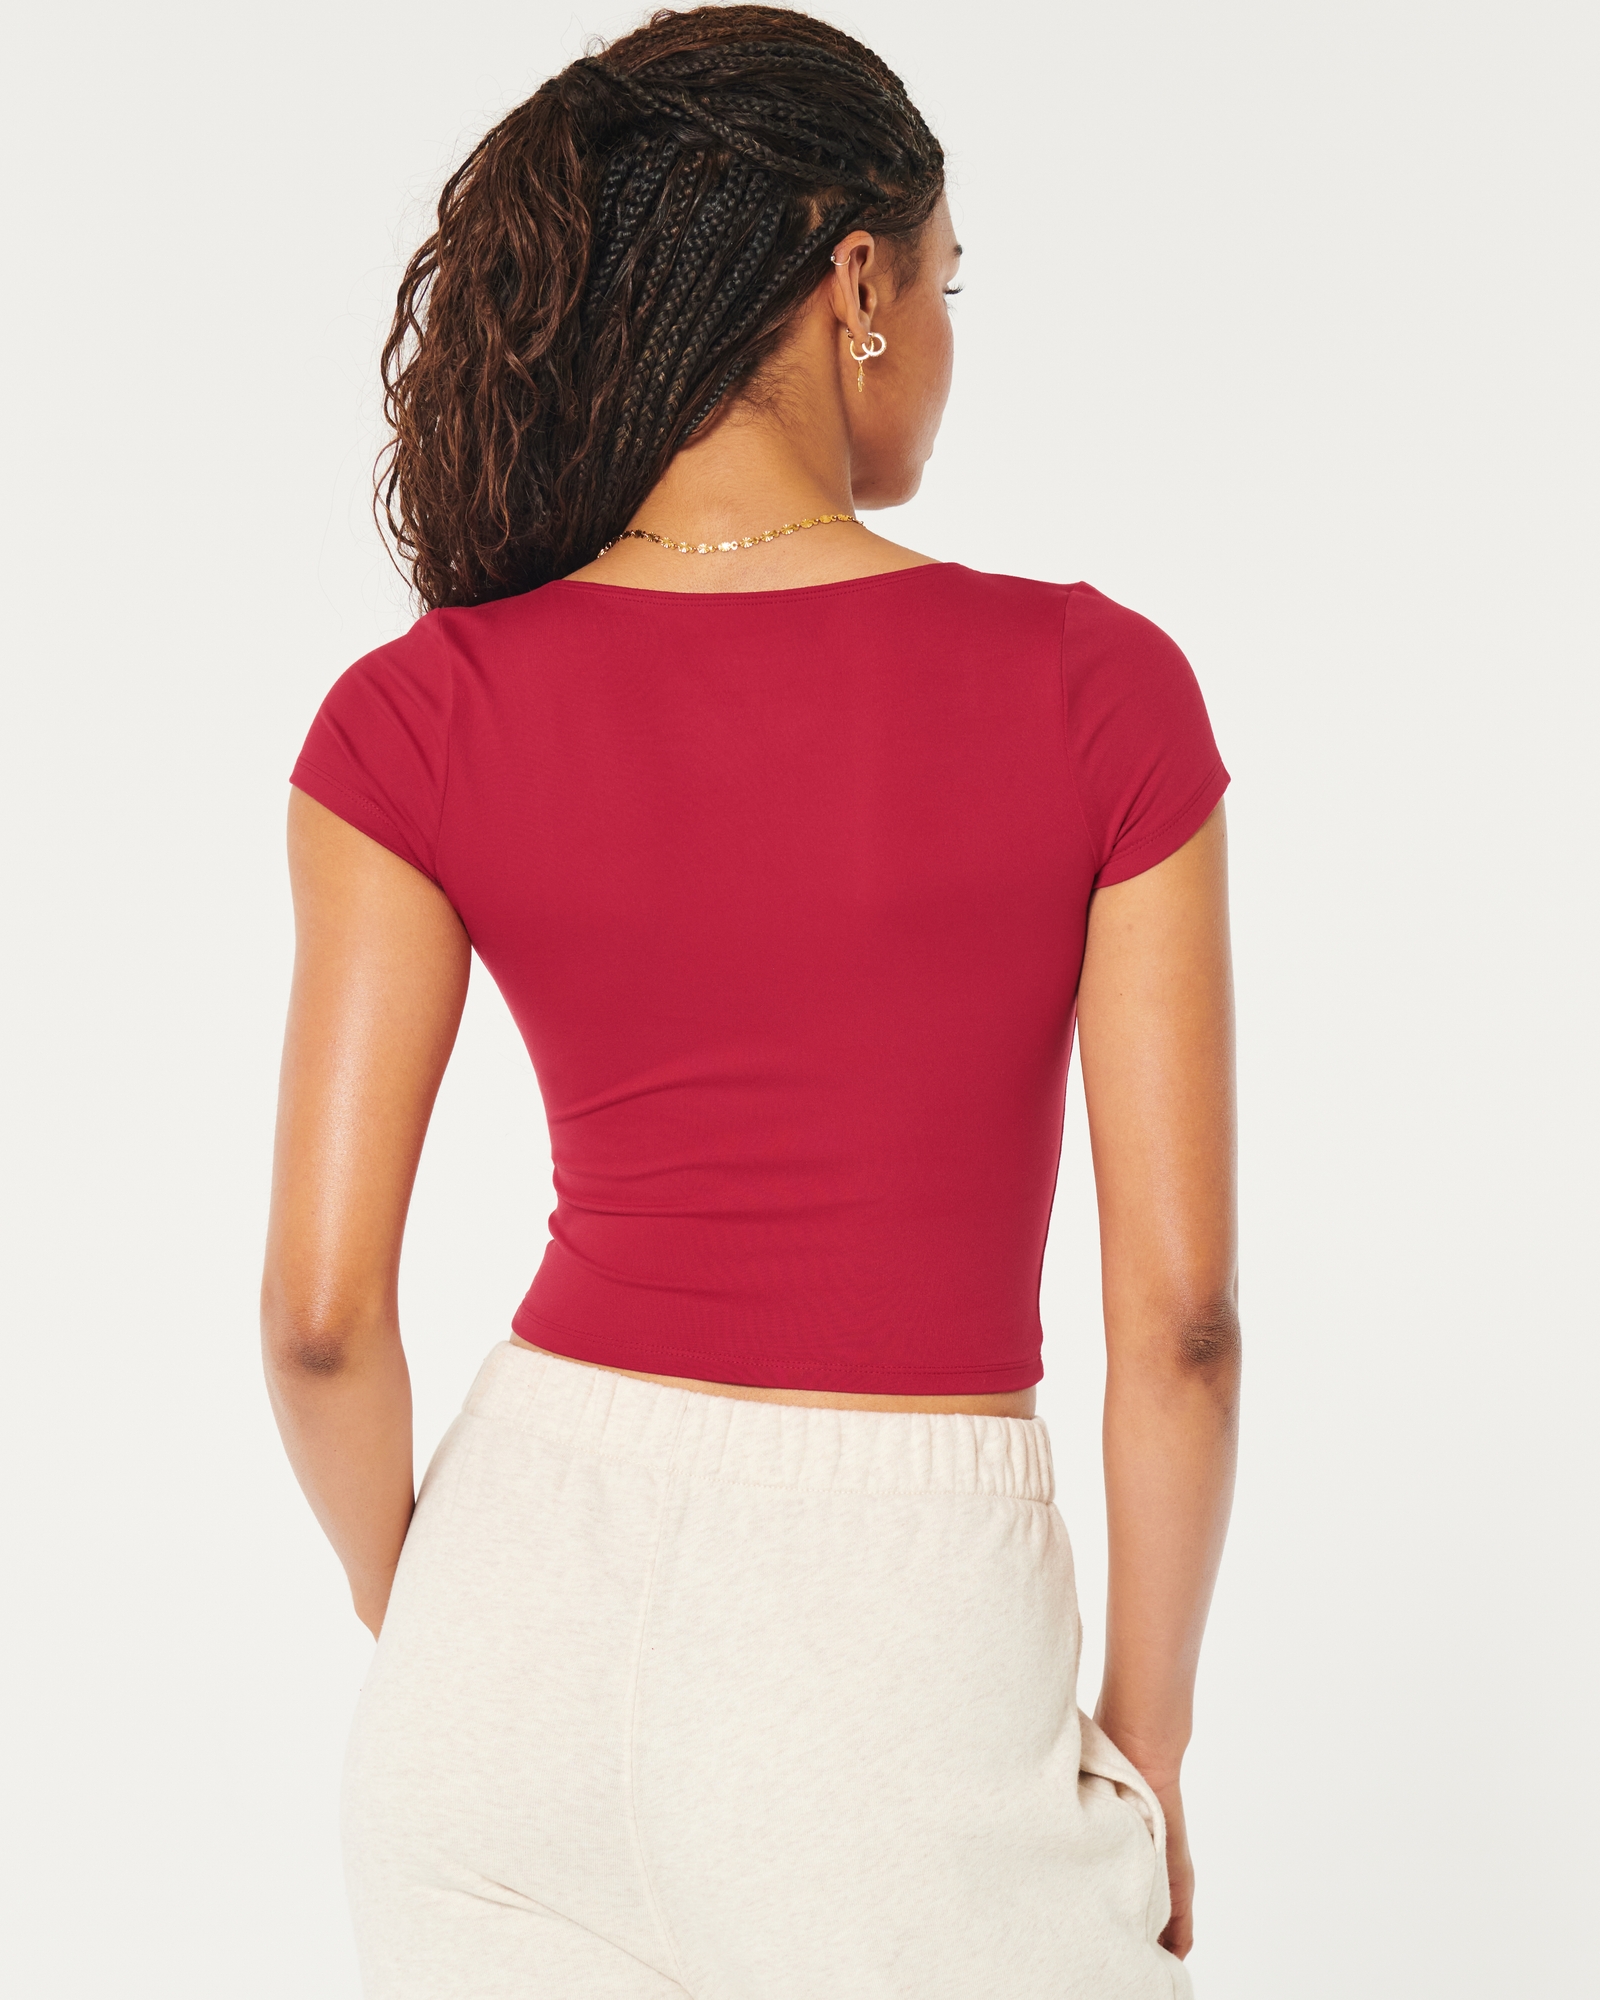 Hollister Pink Seamed Cinch Top Size XXS - $9 (52% Off Retail) - From maddy